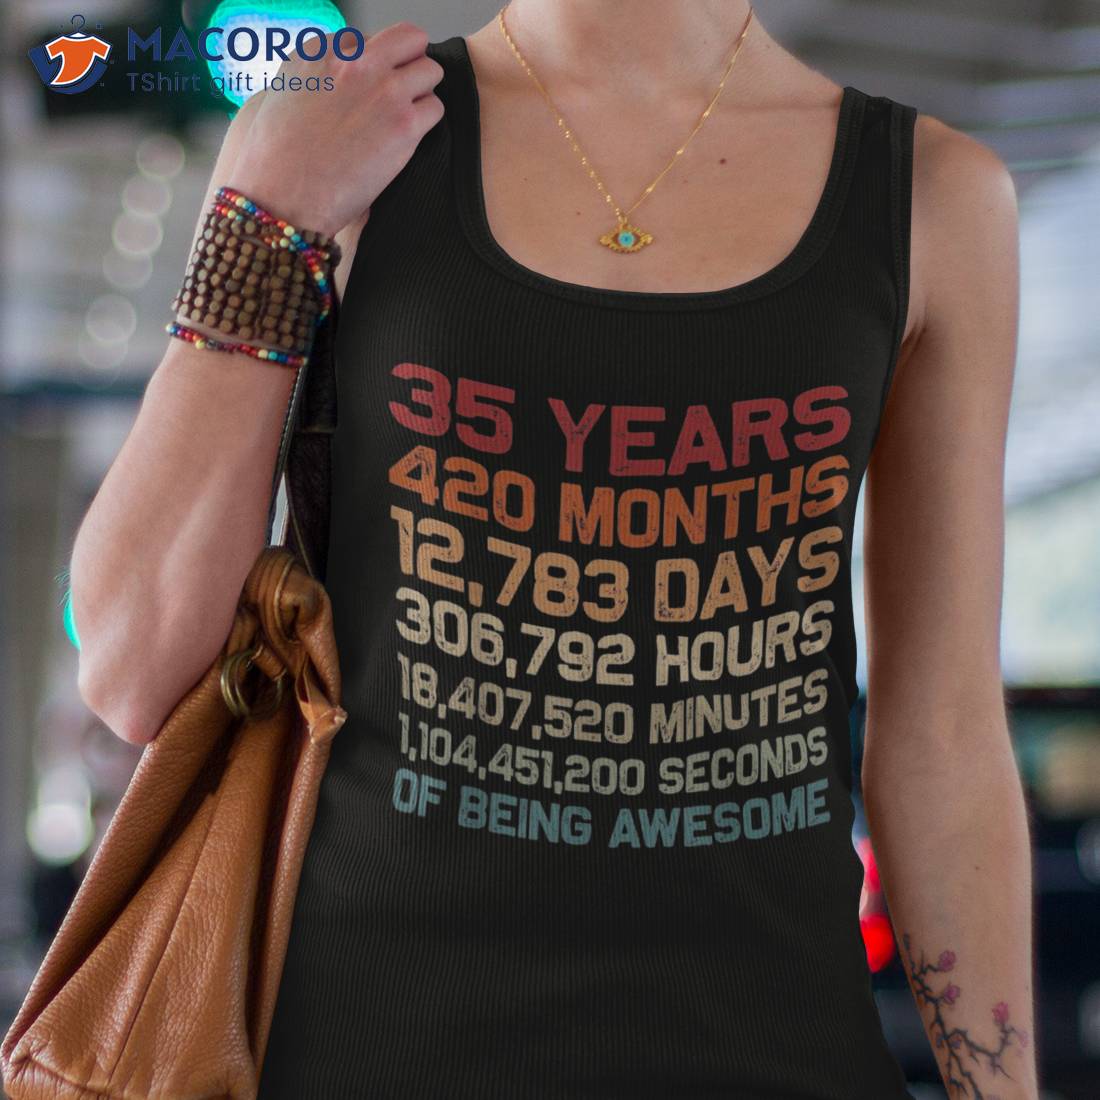 https://images.macoroo.com/wp-content/uploads/2023/06/vintage-35-years-of-being-awesome-unique-35th-birthday-gifts-shirt-tank-top-4.jpg